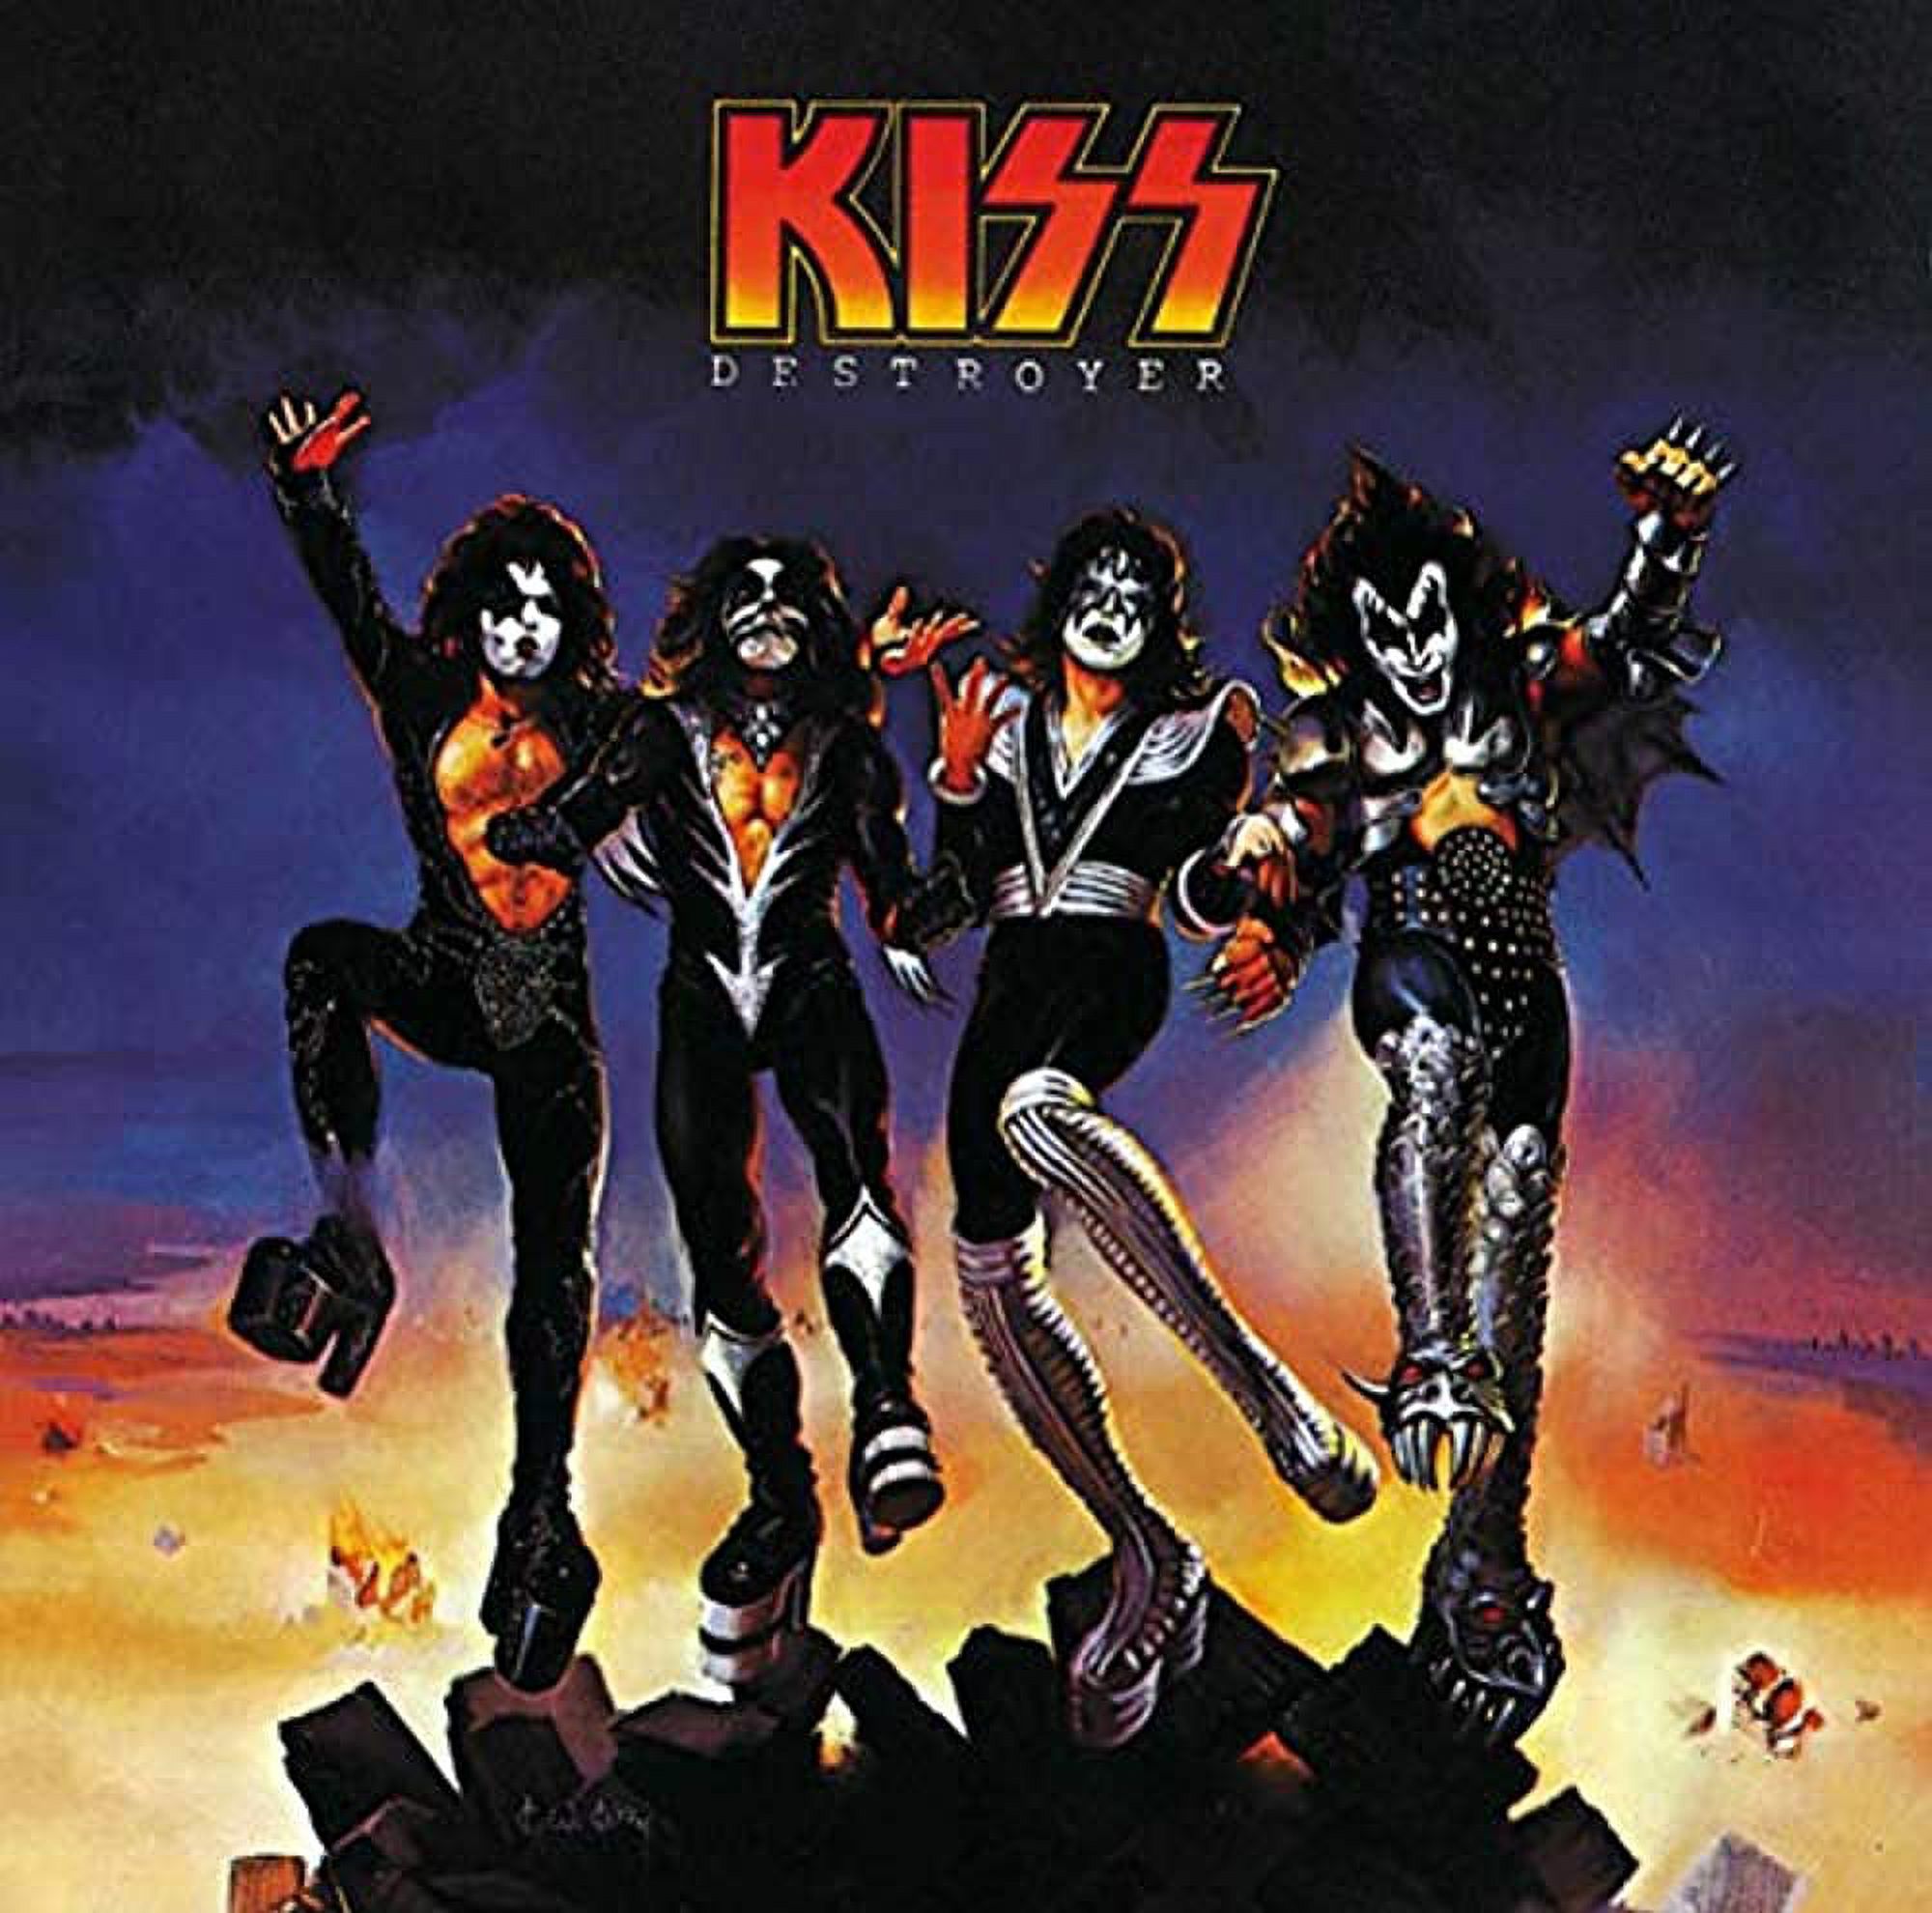 Kiss - Destroyer (remastered) - Heavy Metal - CD - image 2 of 3